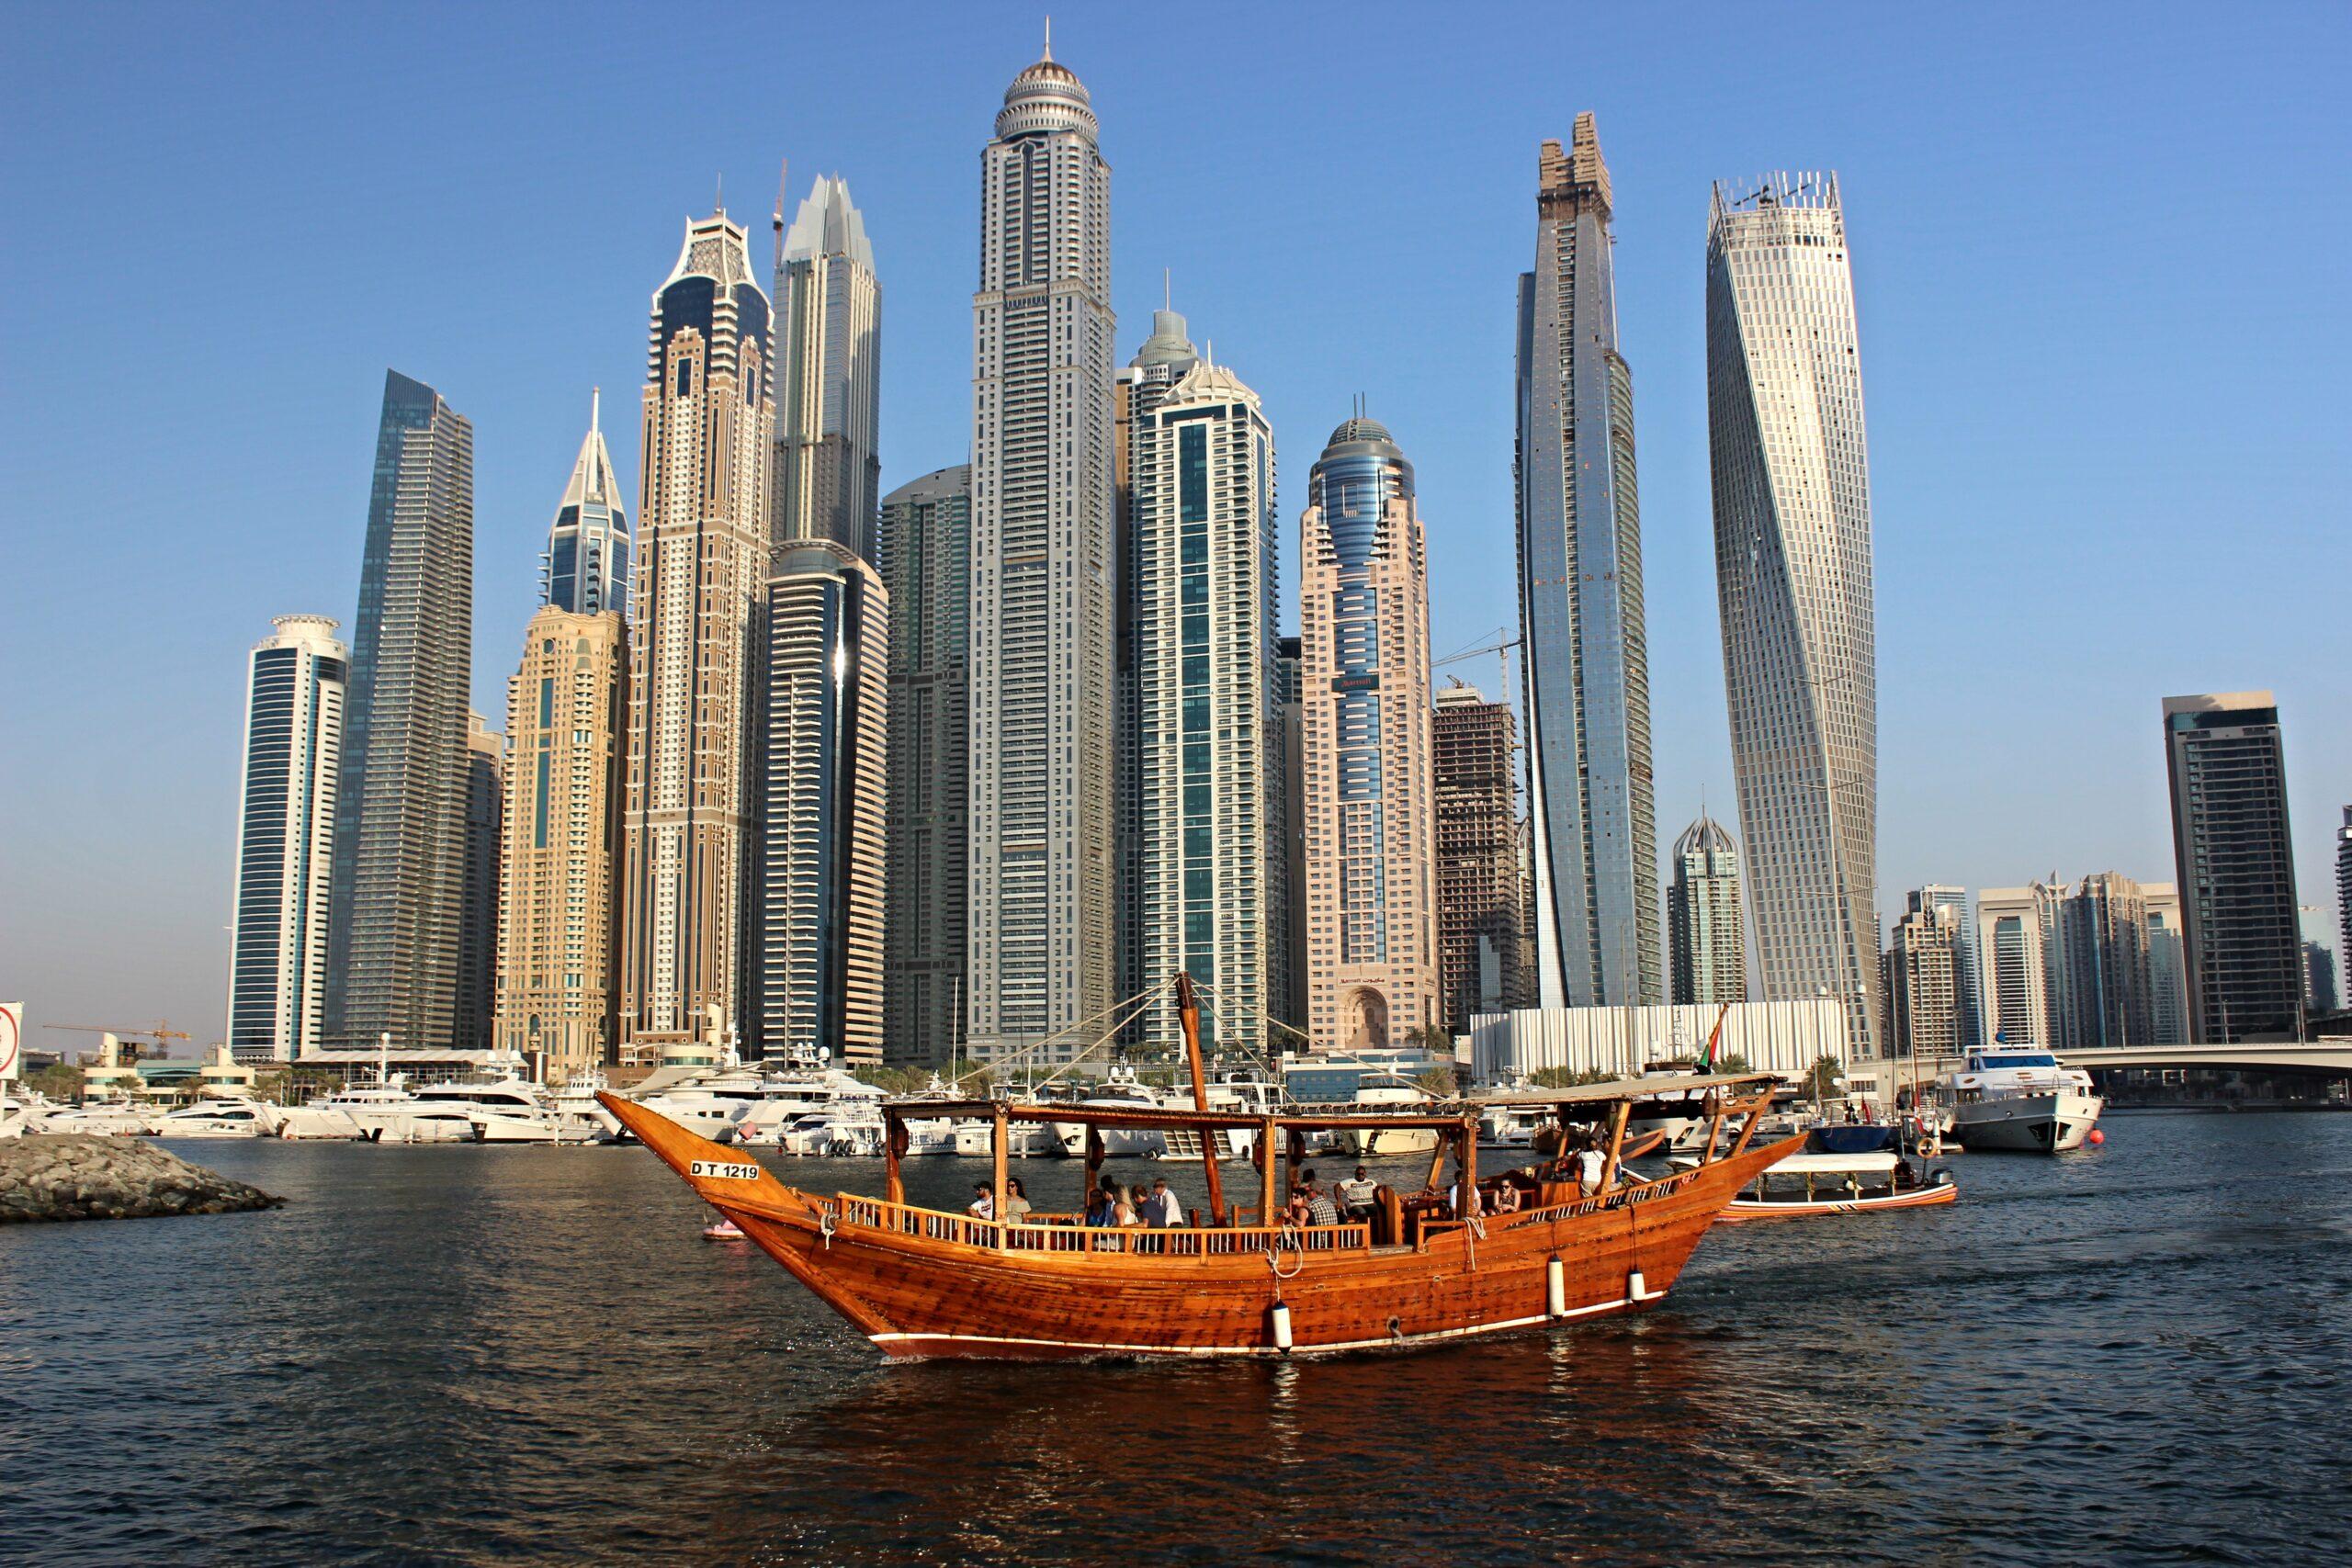 MARINA DHOW CRUISE DUBAI : A MUST HAVE EXPERIENCE